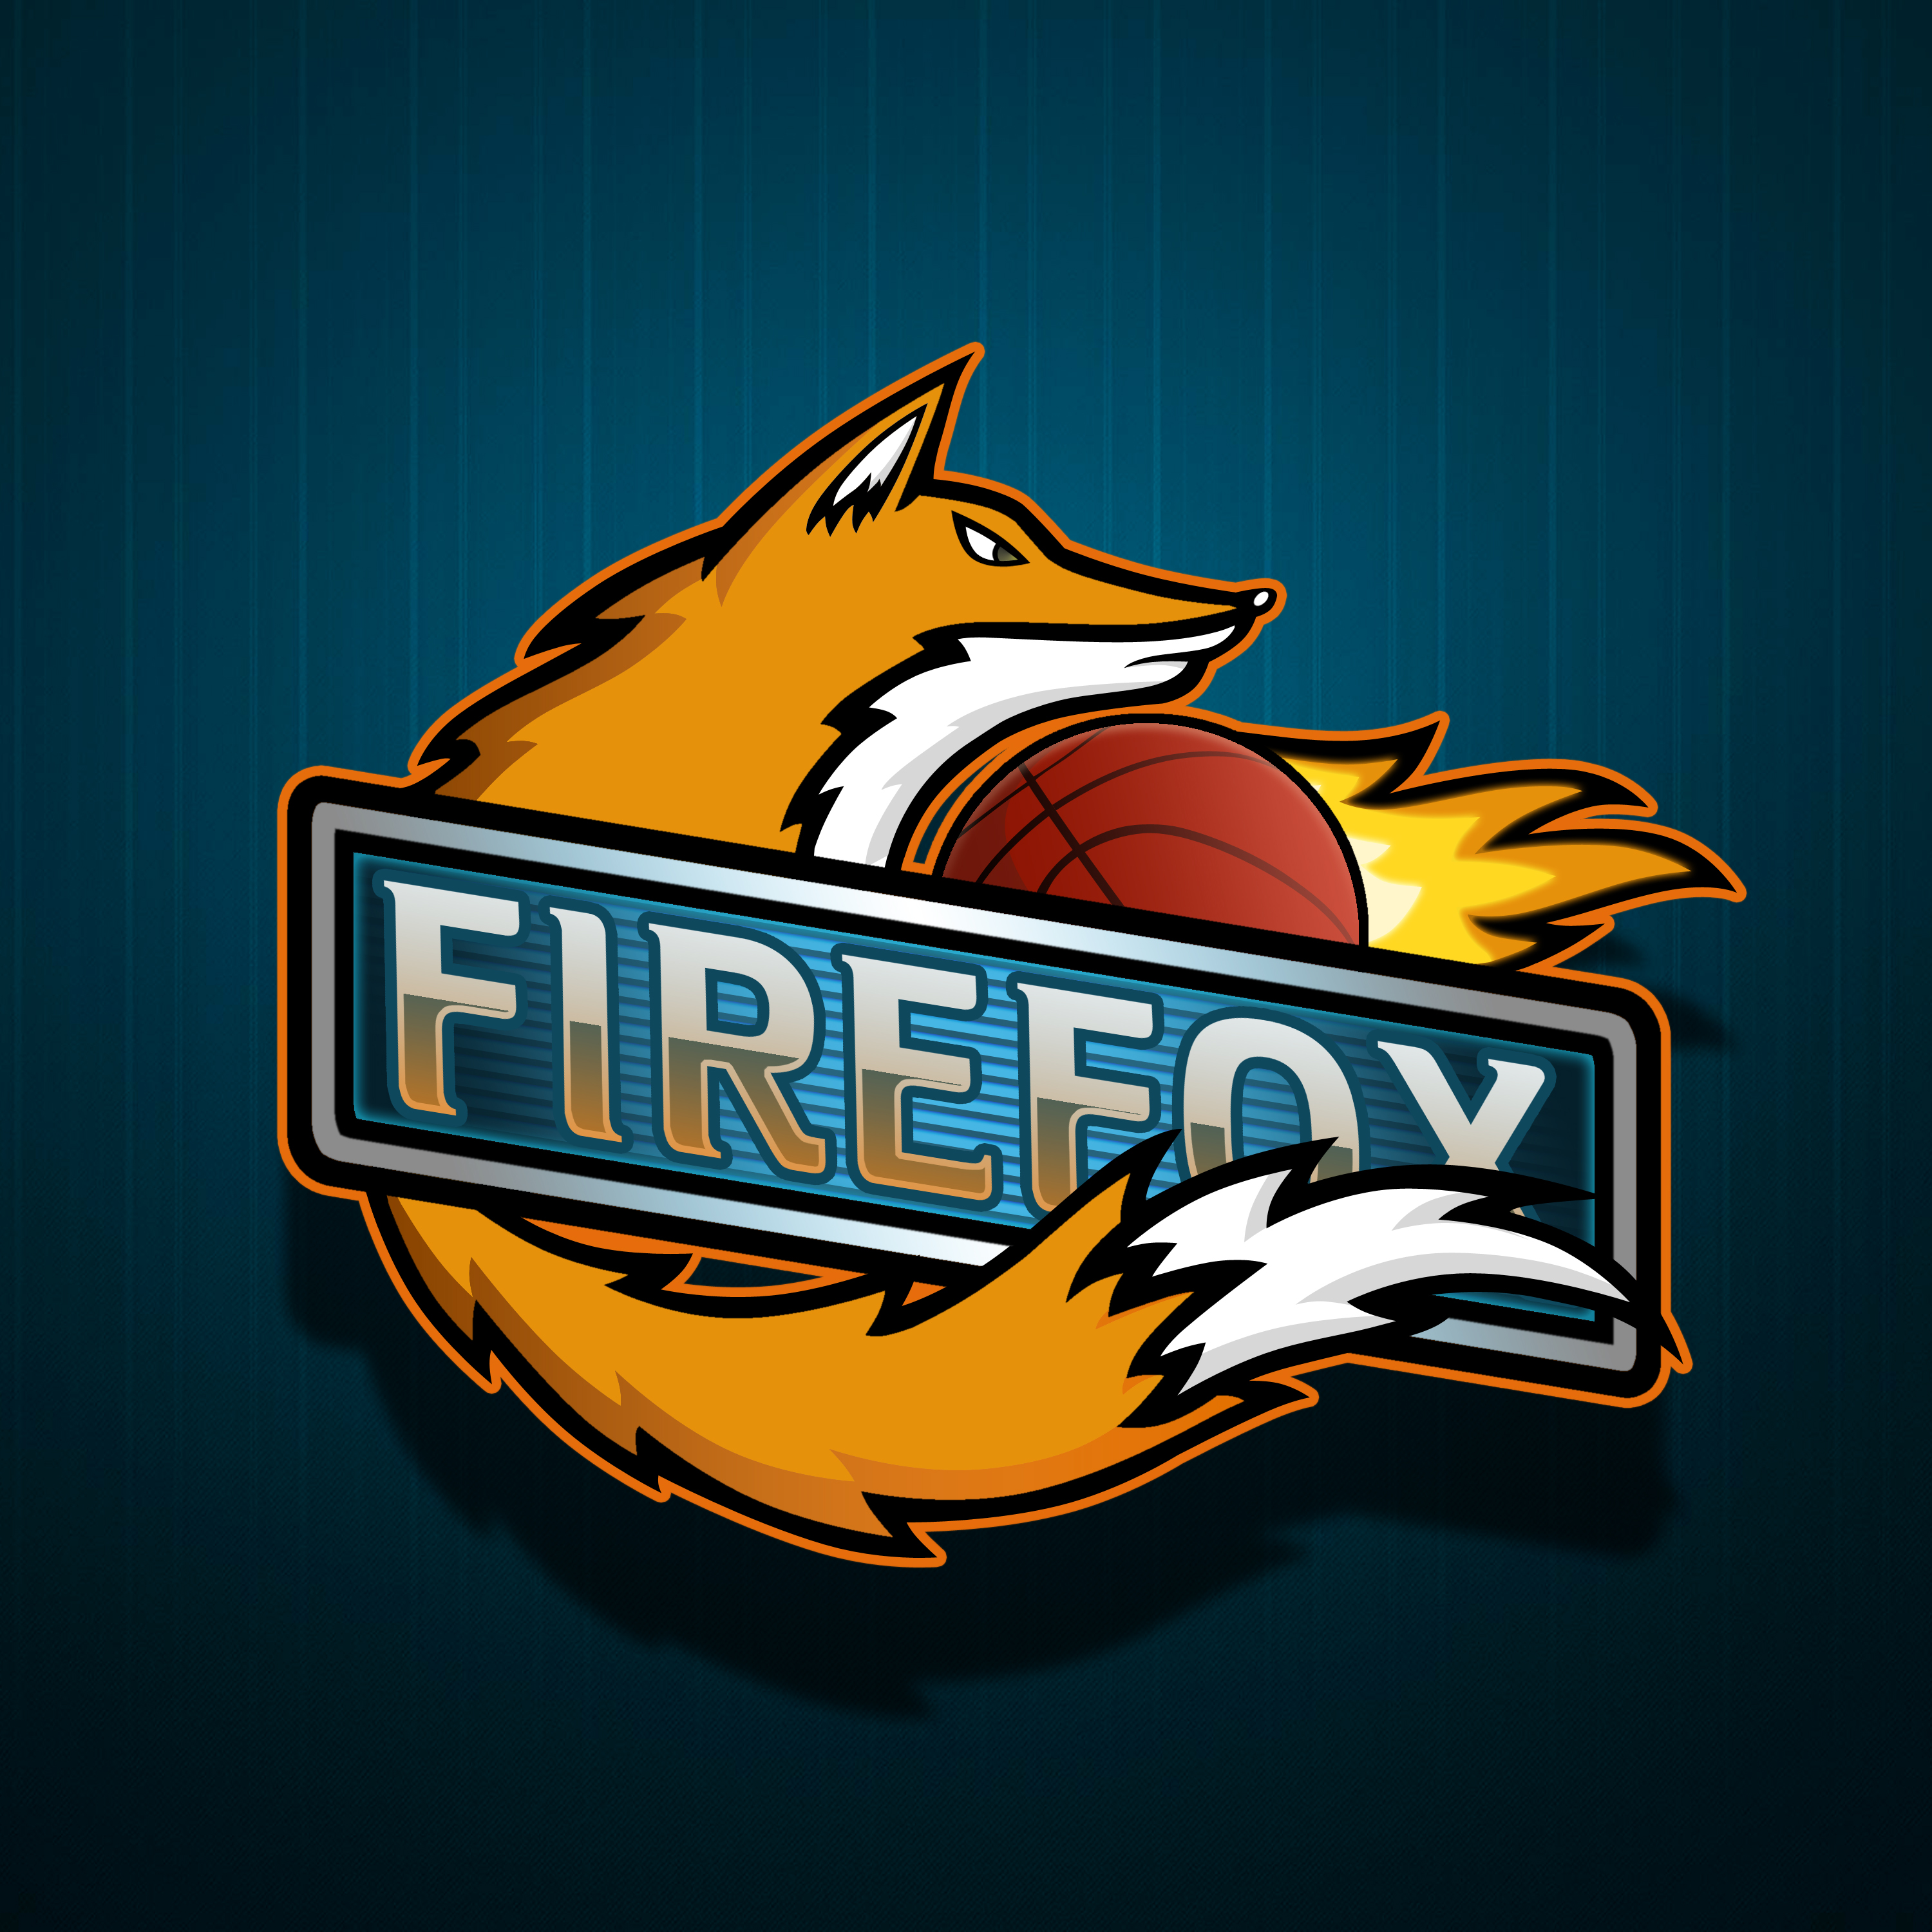 Logo of the basketball teamFireFox by AlexEngine on